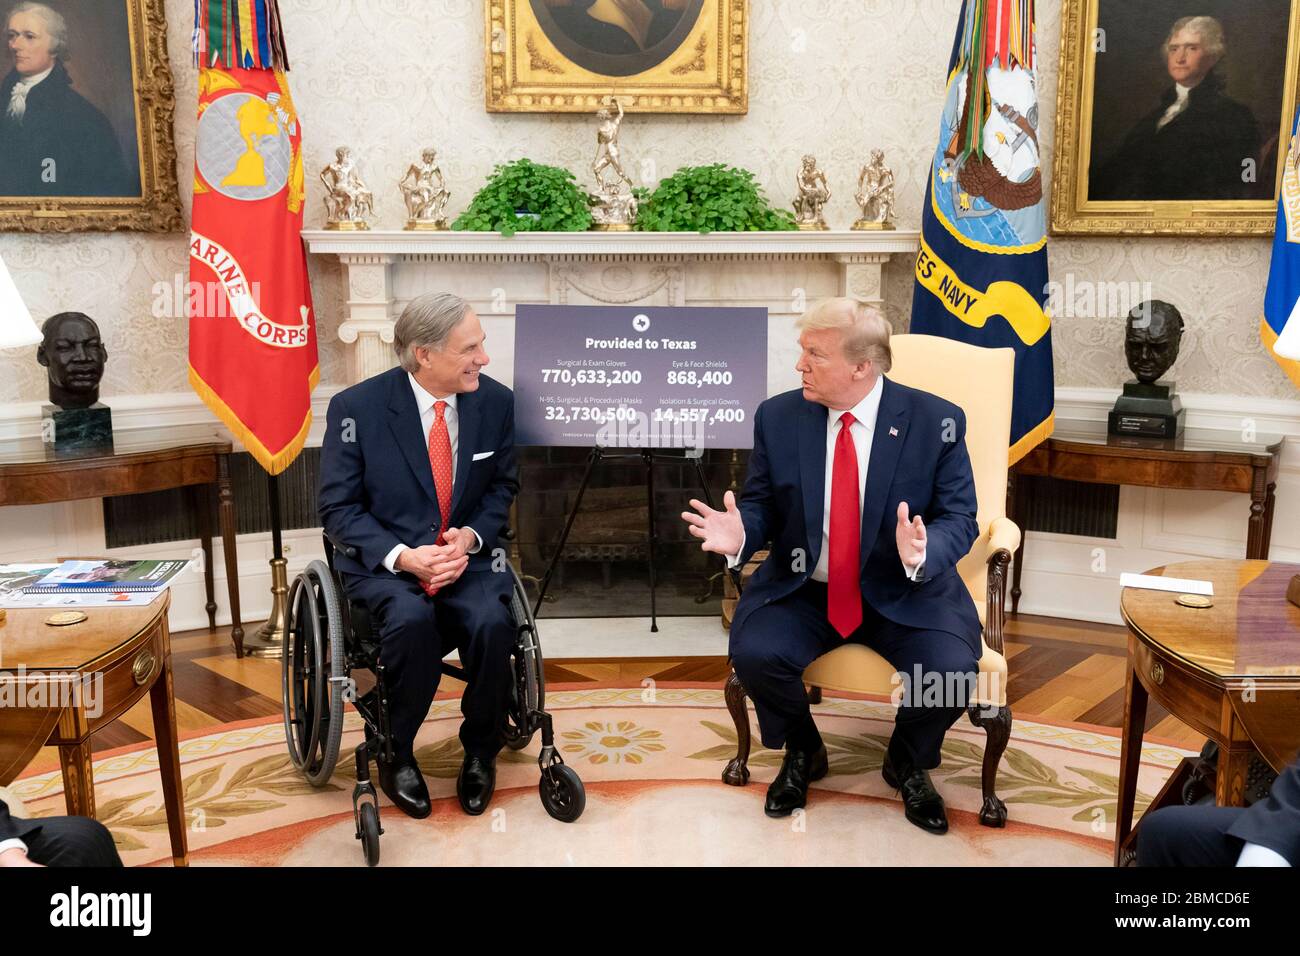 Washington, United States Of America. 07th May, 2020. Washington, United States of America. 07 May, 2020. U.S. President Donald Trump meets with Texas Gov. Greg Abbott in the Oval Office of the White House May 7, 2020 in Washington, DC. Credit: Tia Dufour/White House Photo/Alamy Live News Stock Photo